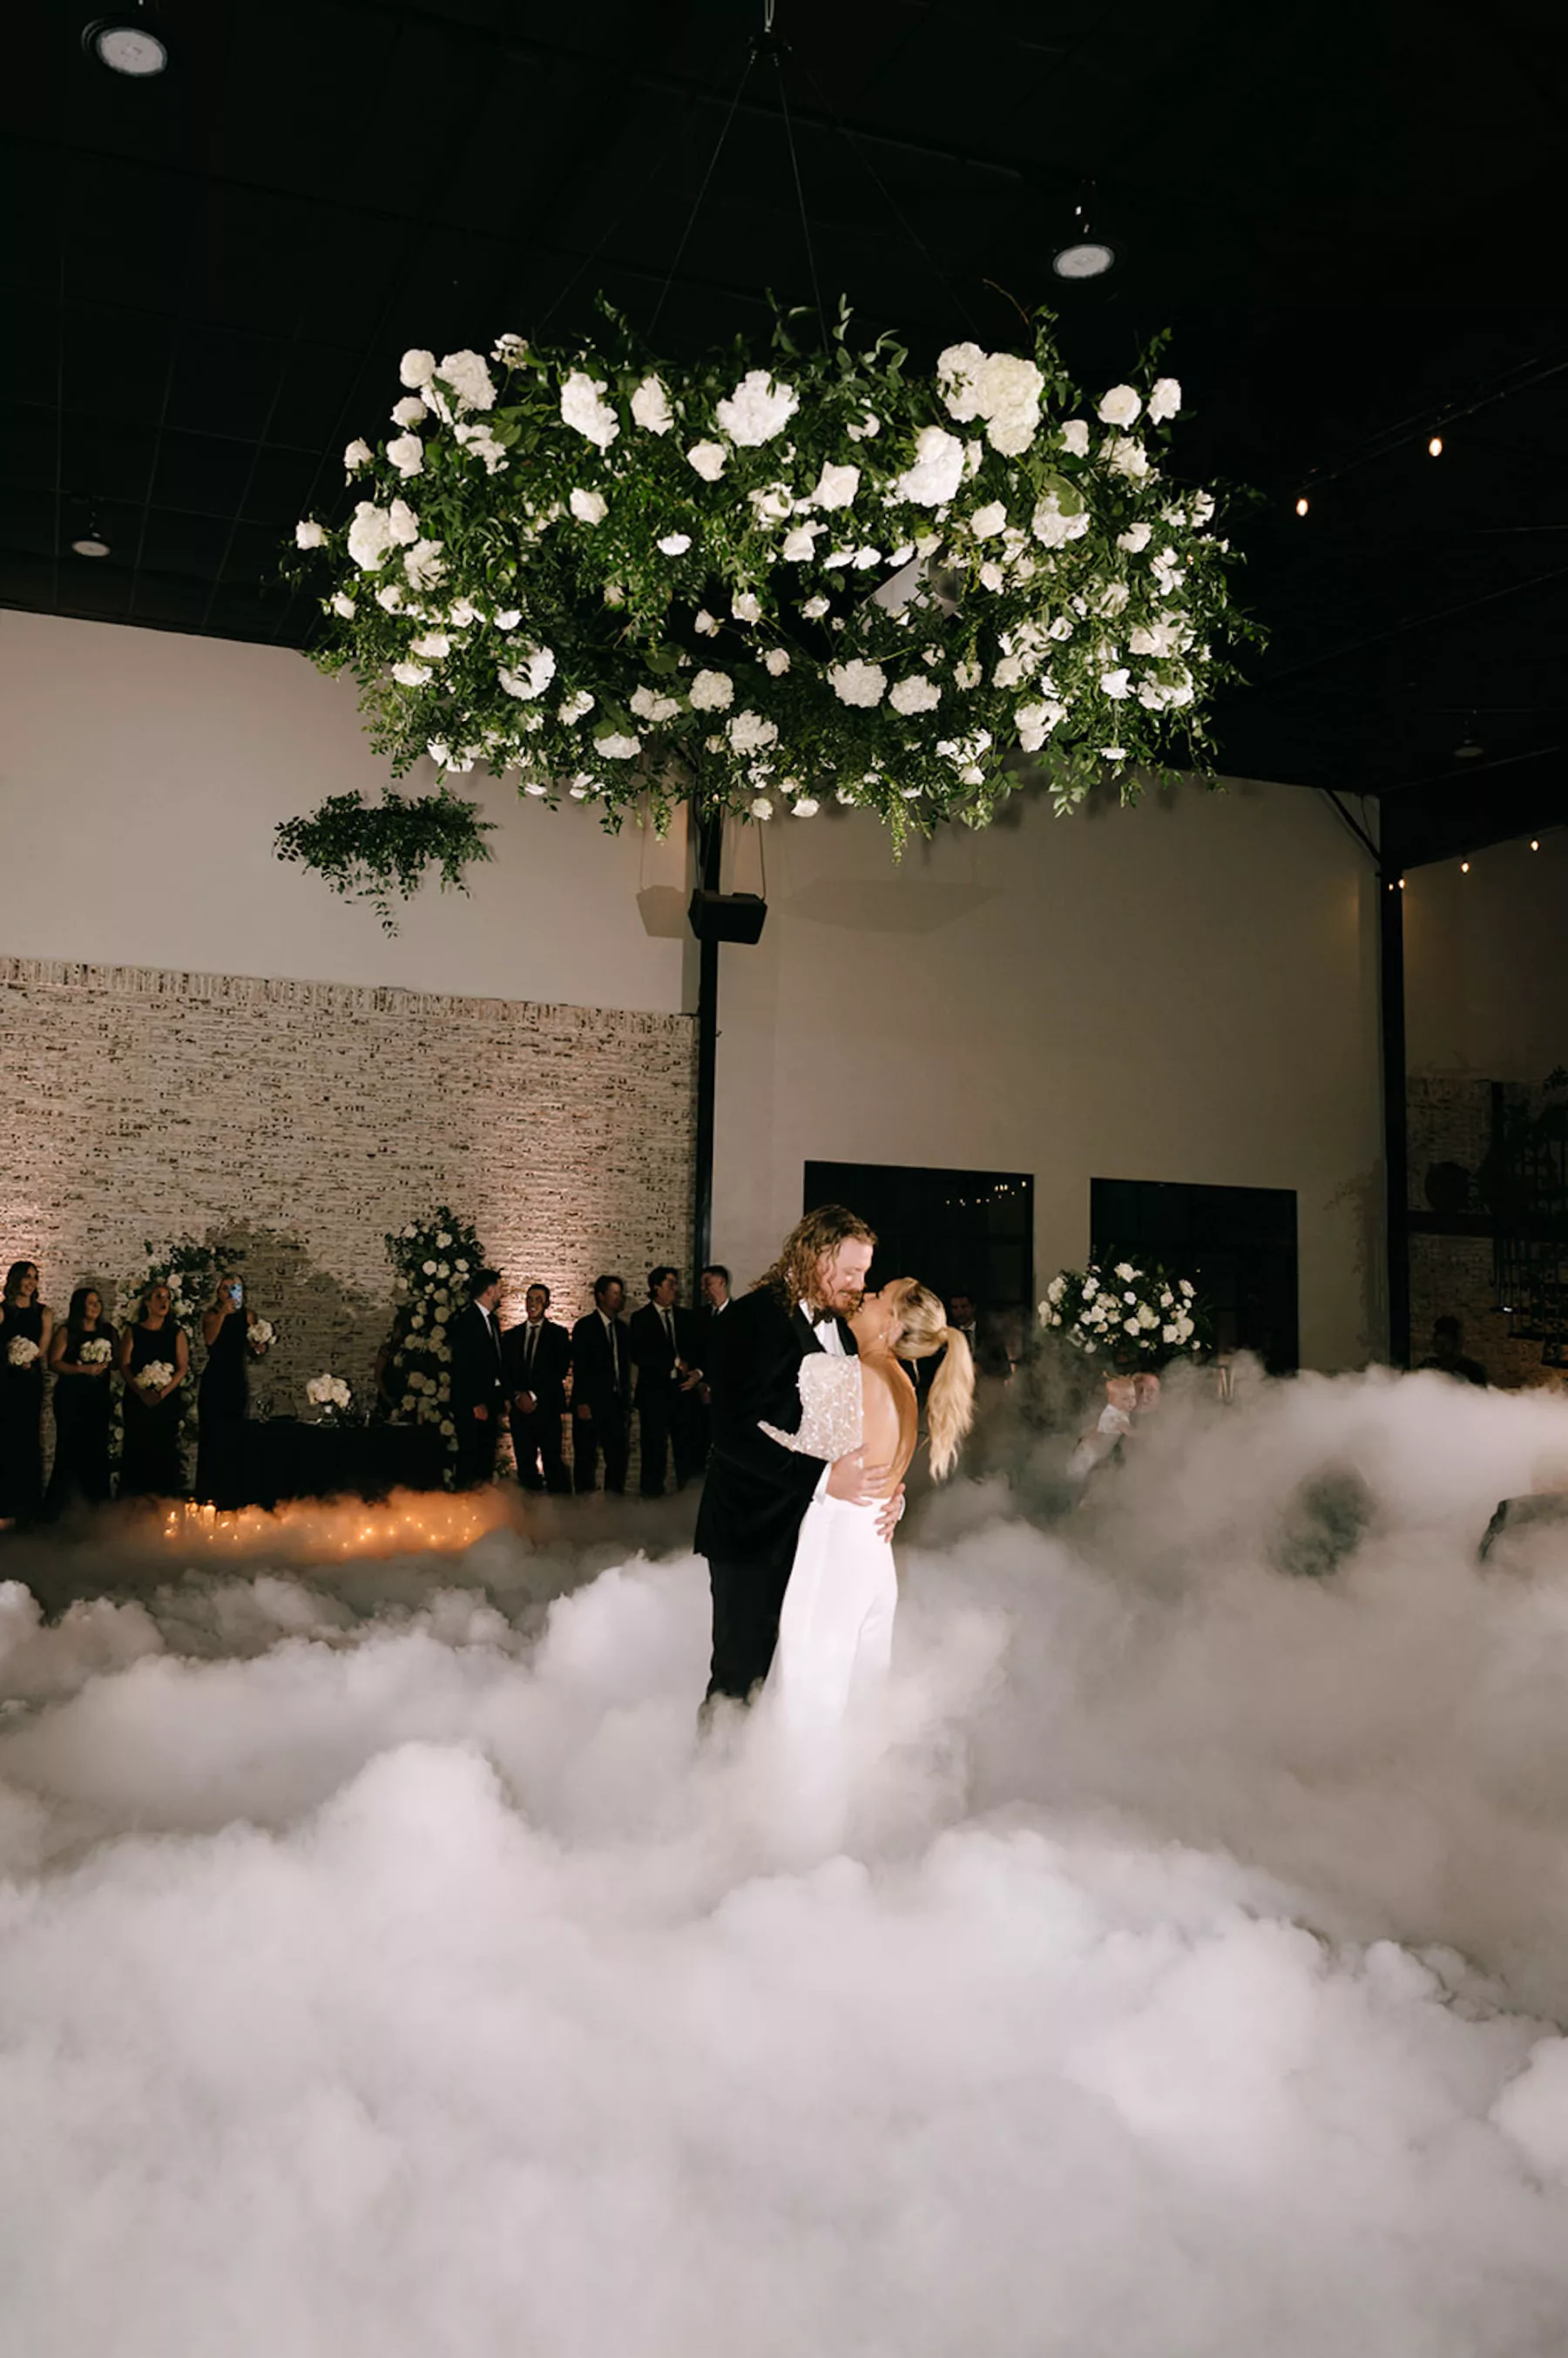 Bride and Groom First Dance with Fog Machine Dancing on a Cloud Inspiration | White Rose, Hydrangeas, and Greenery Floral Chandelier Ideas | Tampa Bay Florist Bloom Shakalaka | DJ Graingertainment